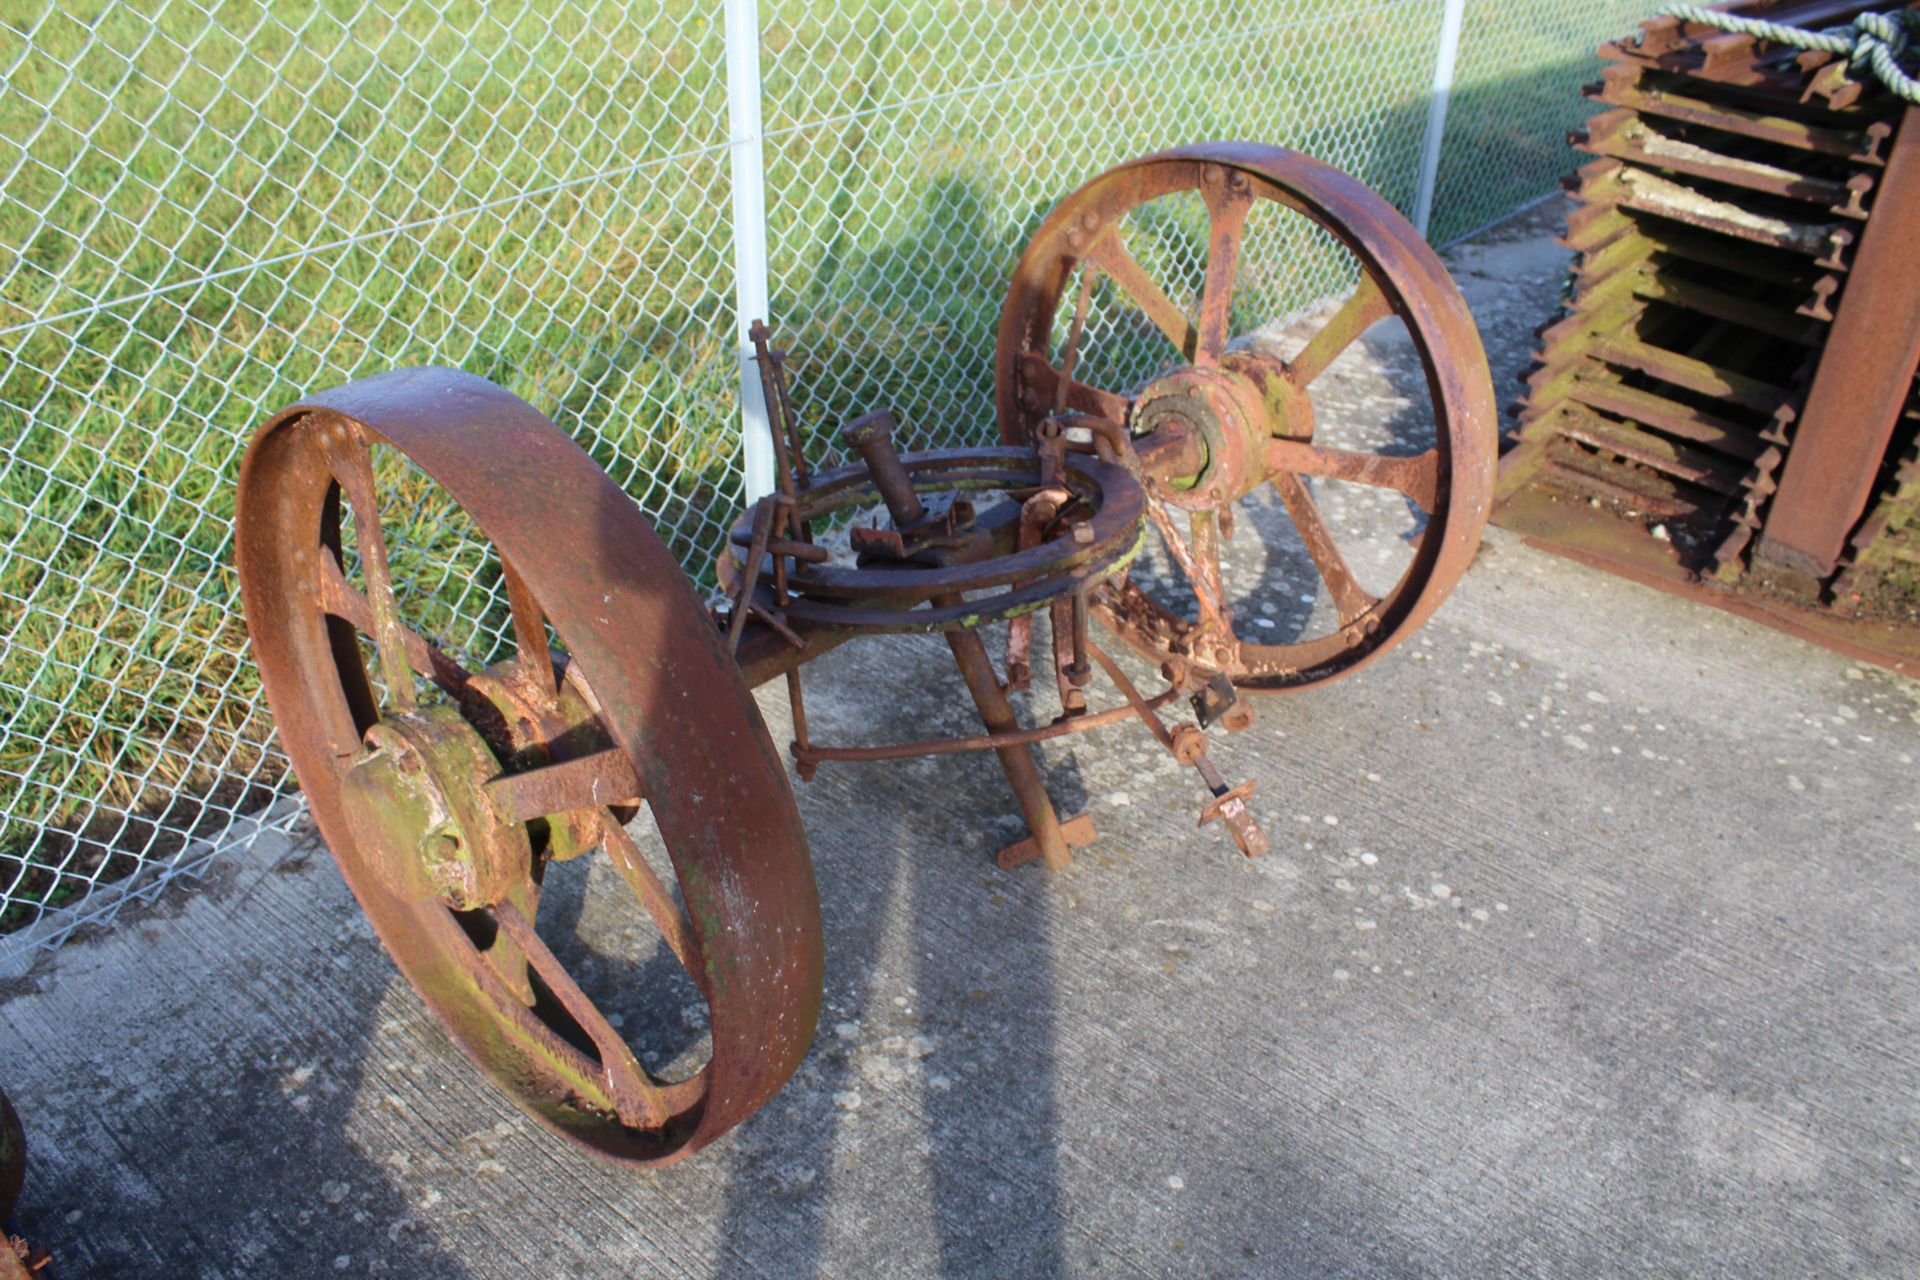 ** LOT WITHDRAWN ** Pair of cast iron wheels on axle with turntable. Ex-straw pitcher. - Image 4 of 7